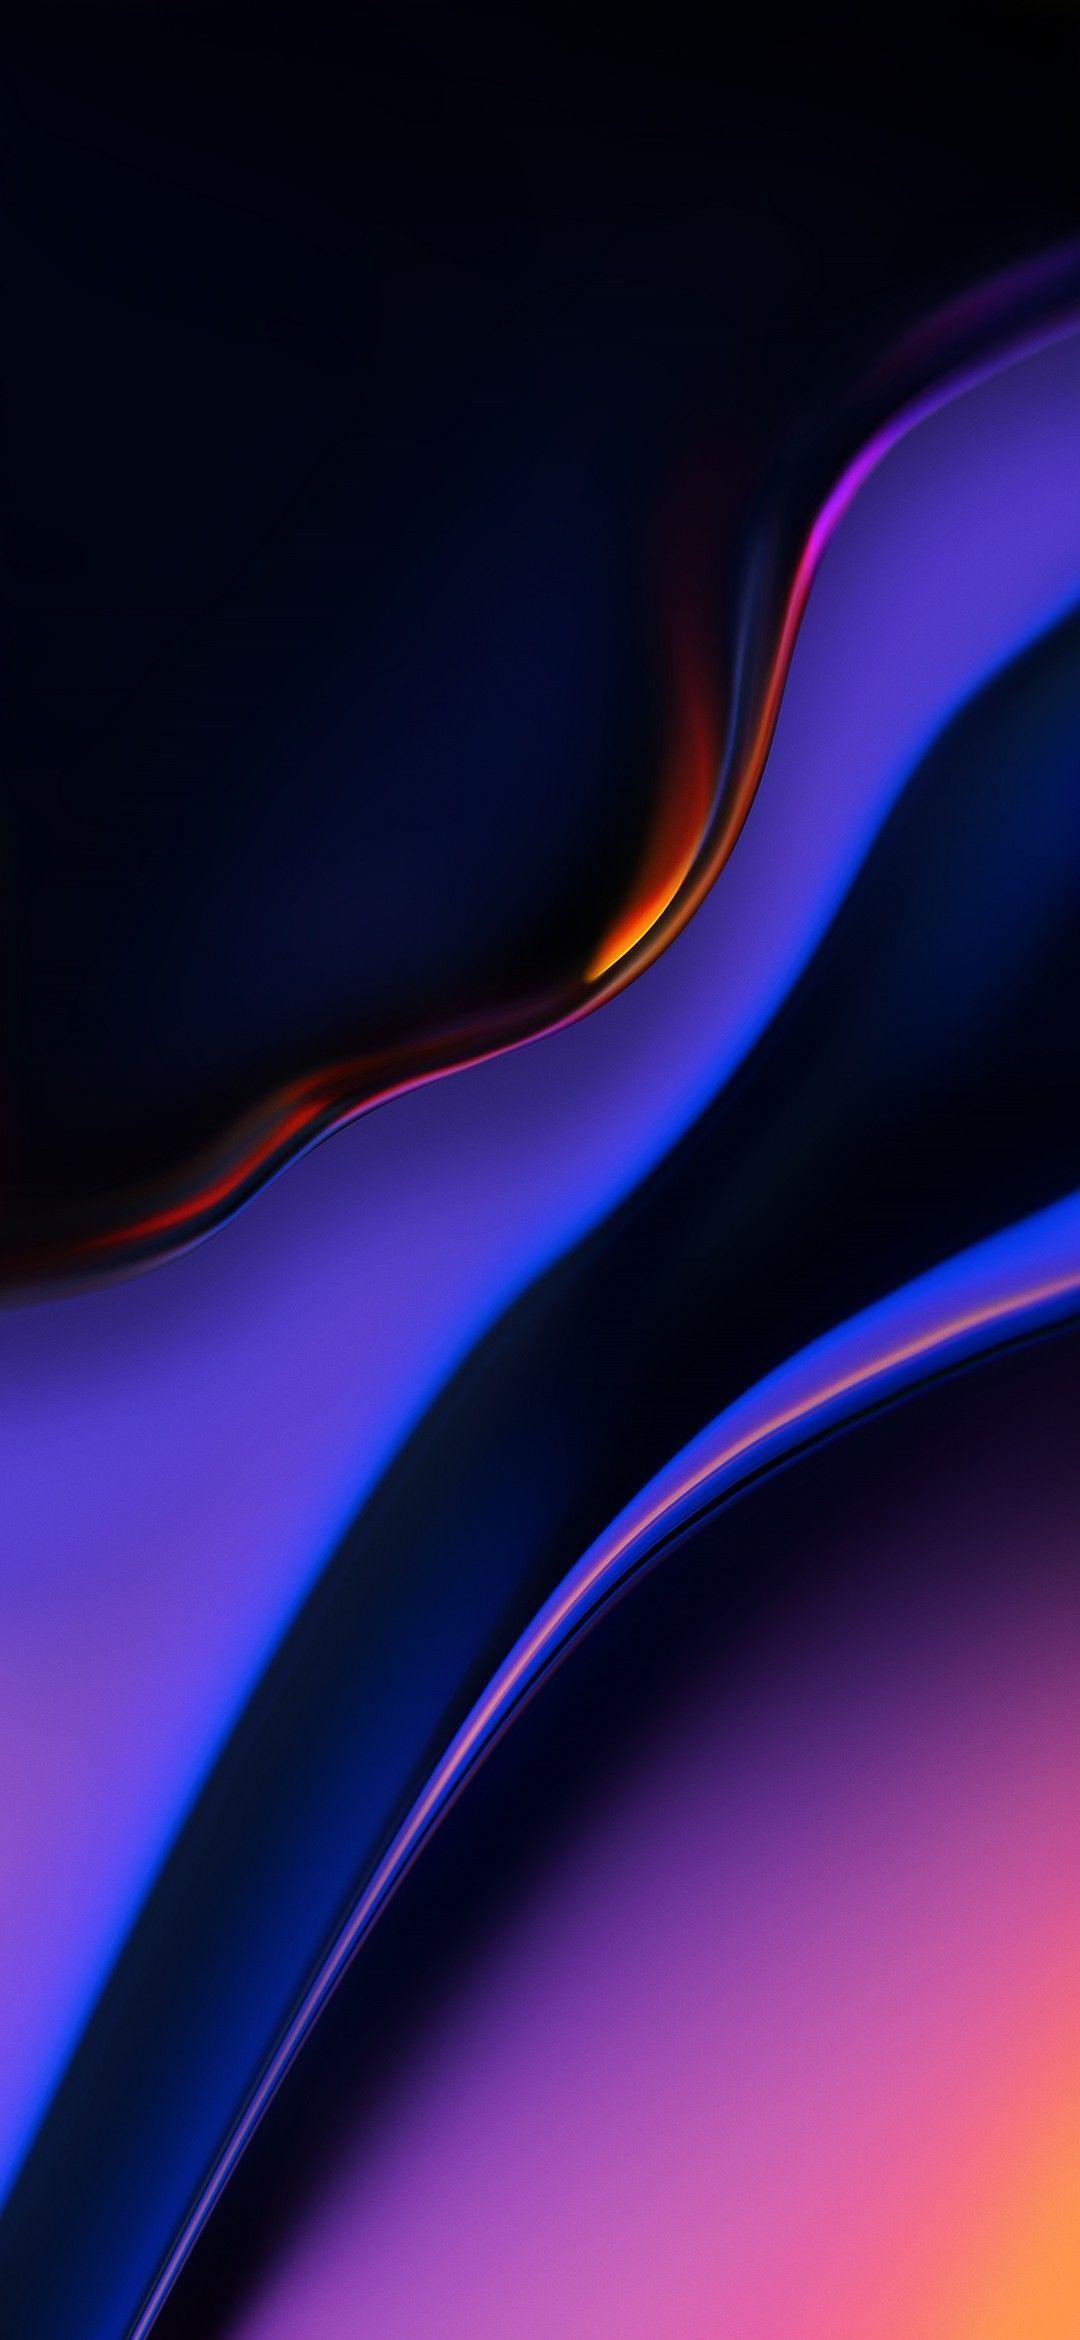 2860 Samsung Galaxy M40  Samsung A80 Wallpaper 4k  1080x2340   Android  iPhone HD Wallpaper Background Download HD Wallpapers Desktop  Background  Android  iPhone 1080p 4k 1080x2340 2023